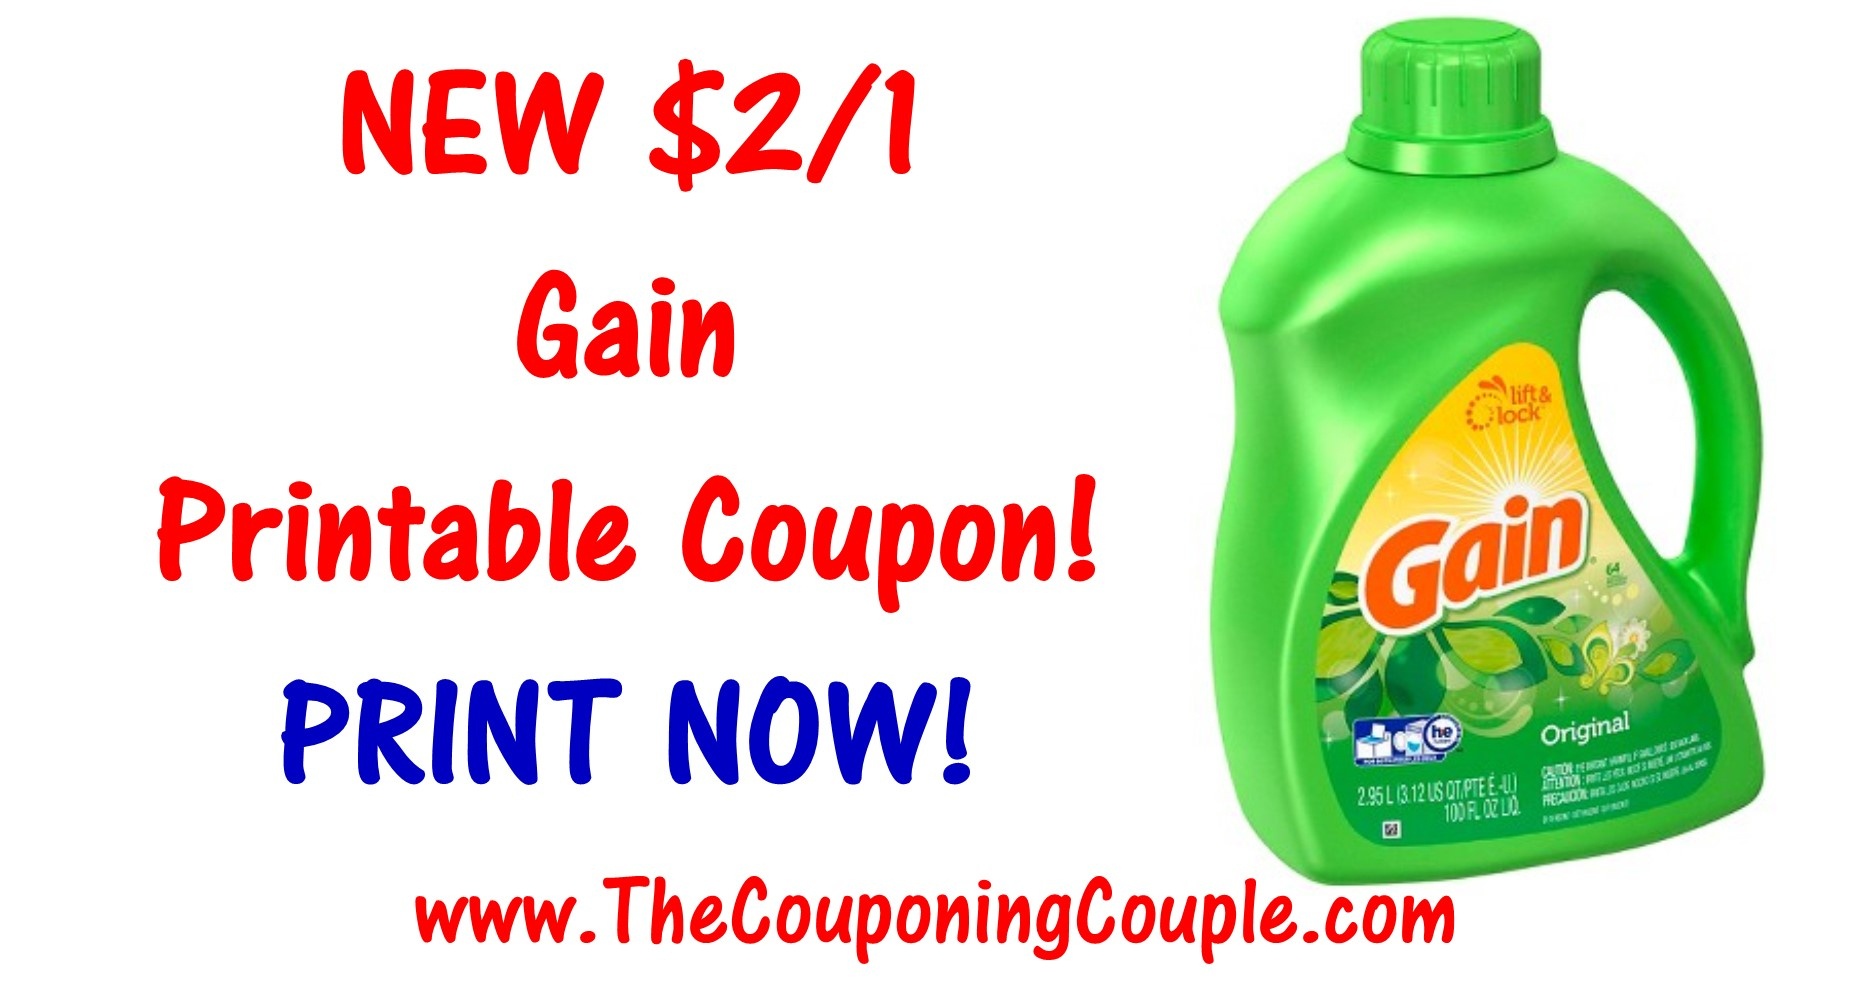 New Gain Printable Coupon ~ Print $2/1 Coupon Now! - Free Detergent Coupons Printable